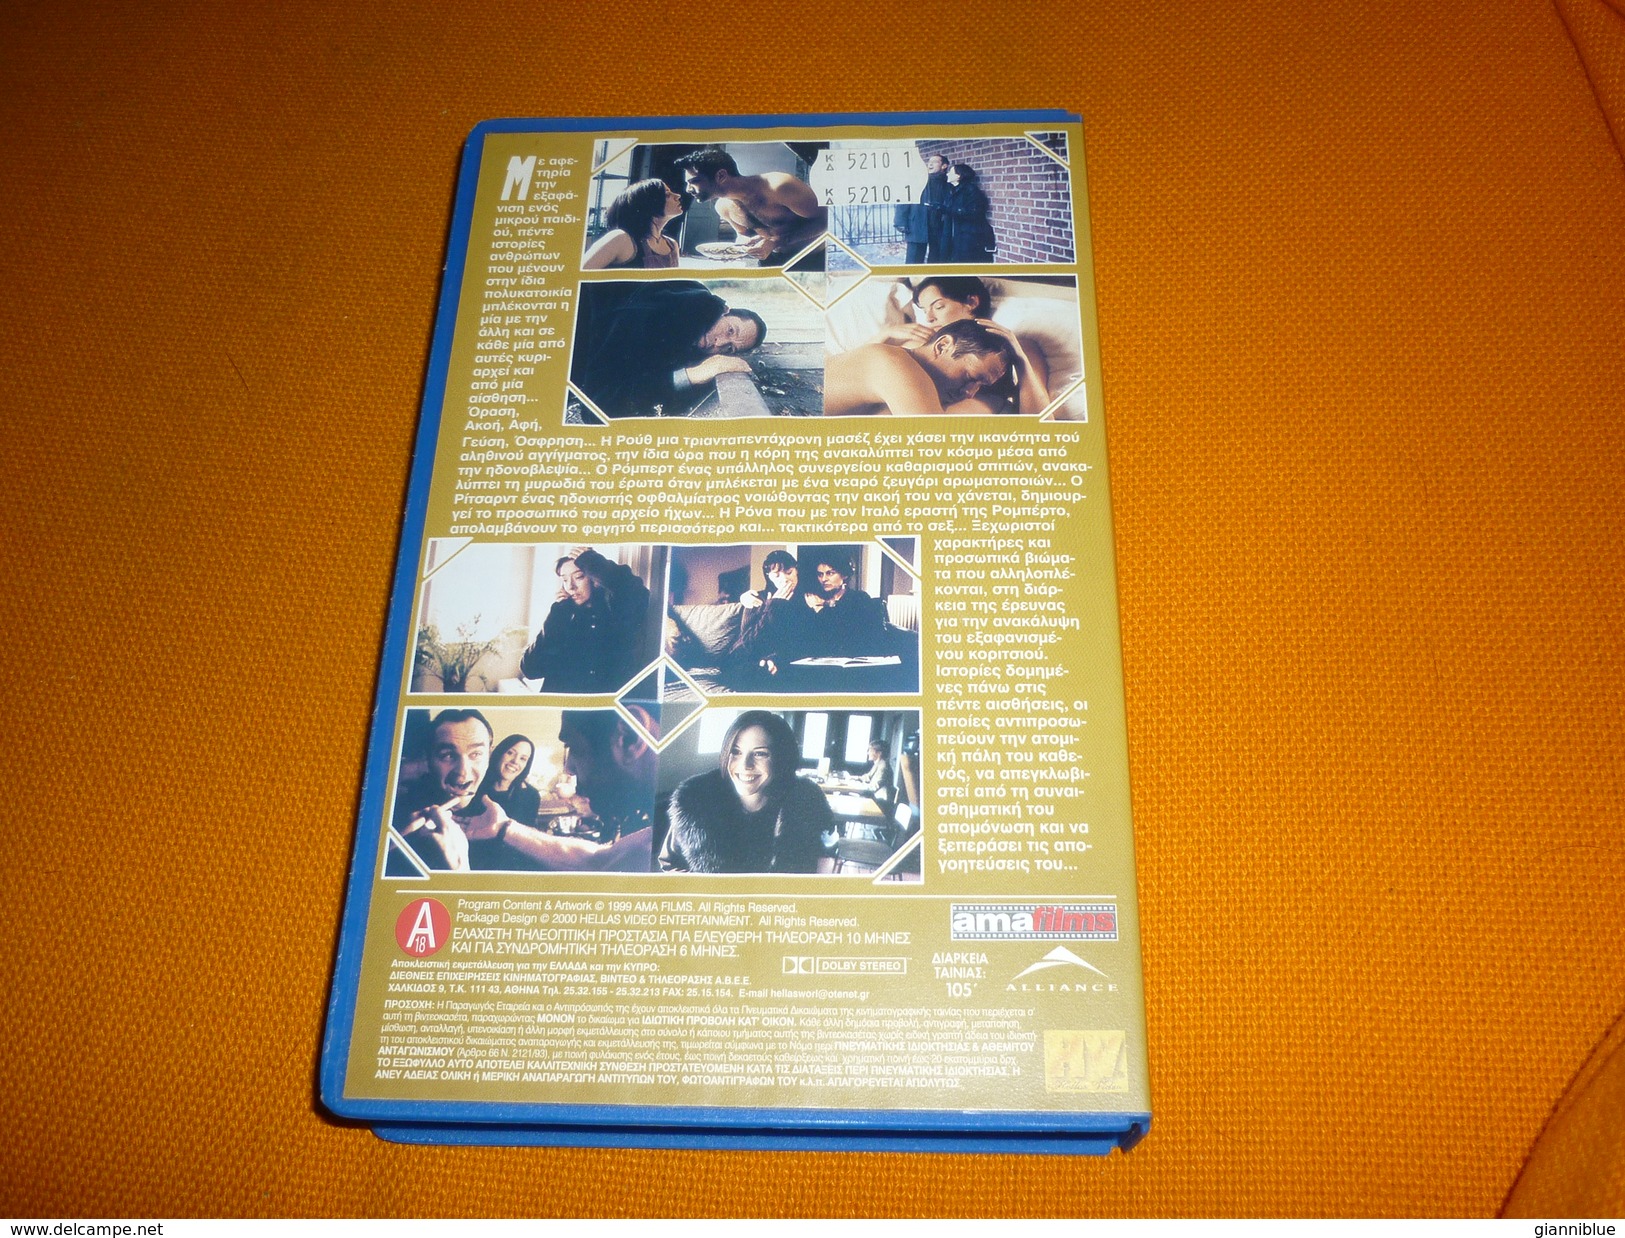 The Five Senses Old Greek Vhs Cassette Tape From Greece - Drama